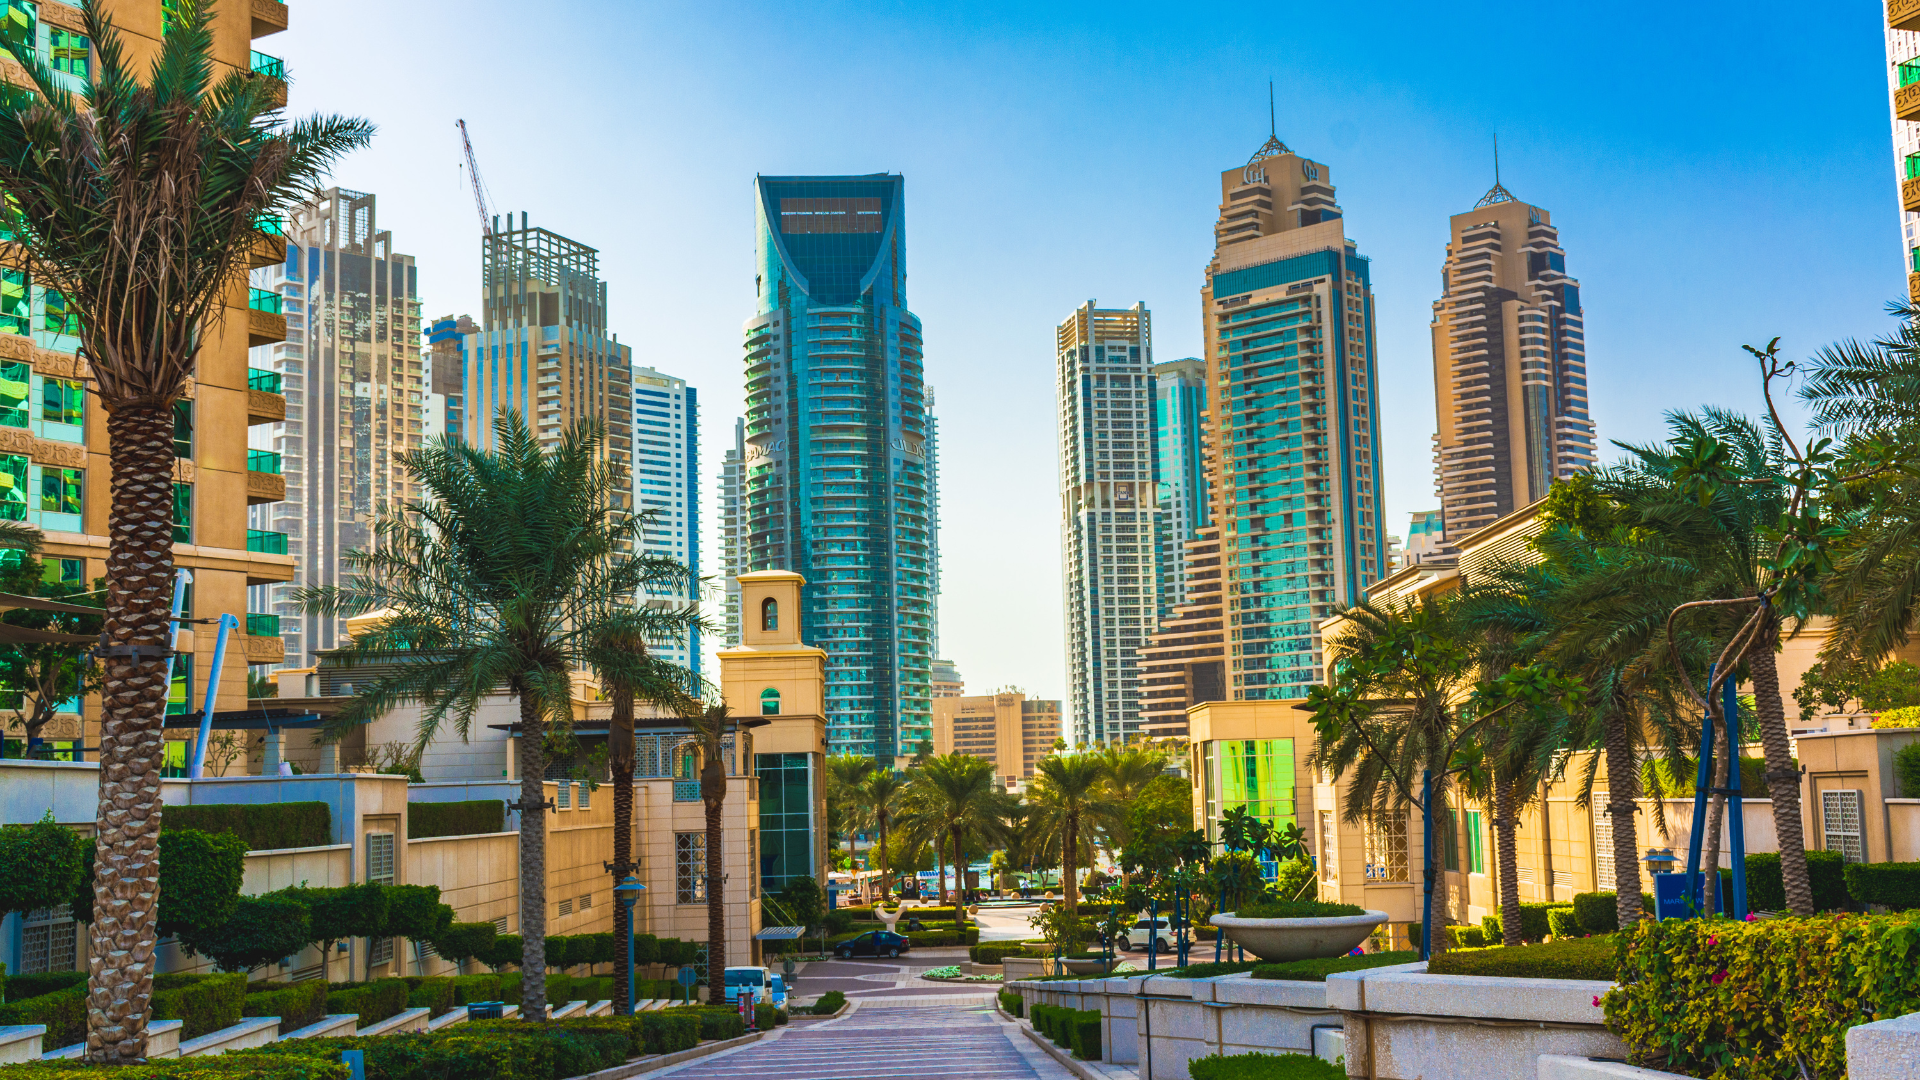 What There is to Enjoy in Dubai as a Resident